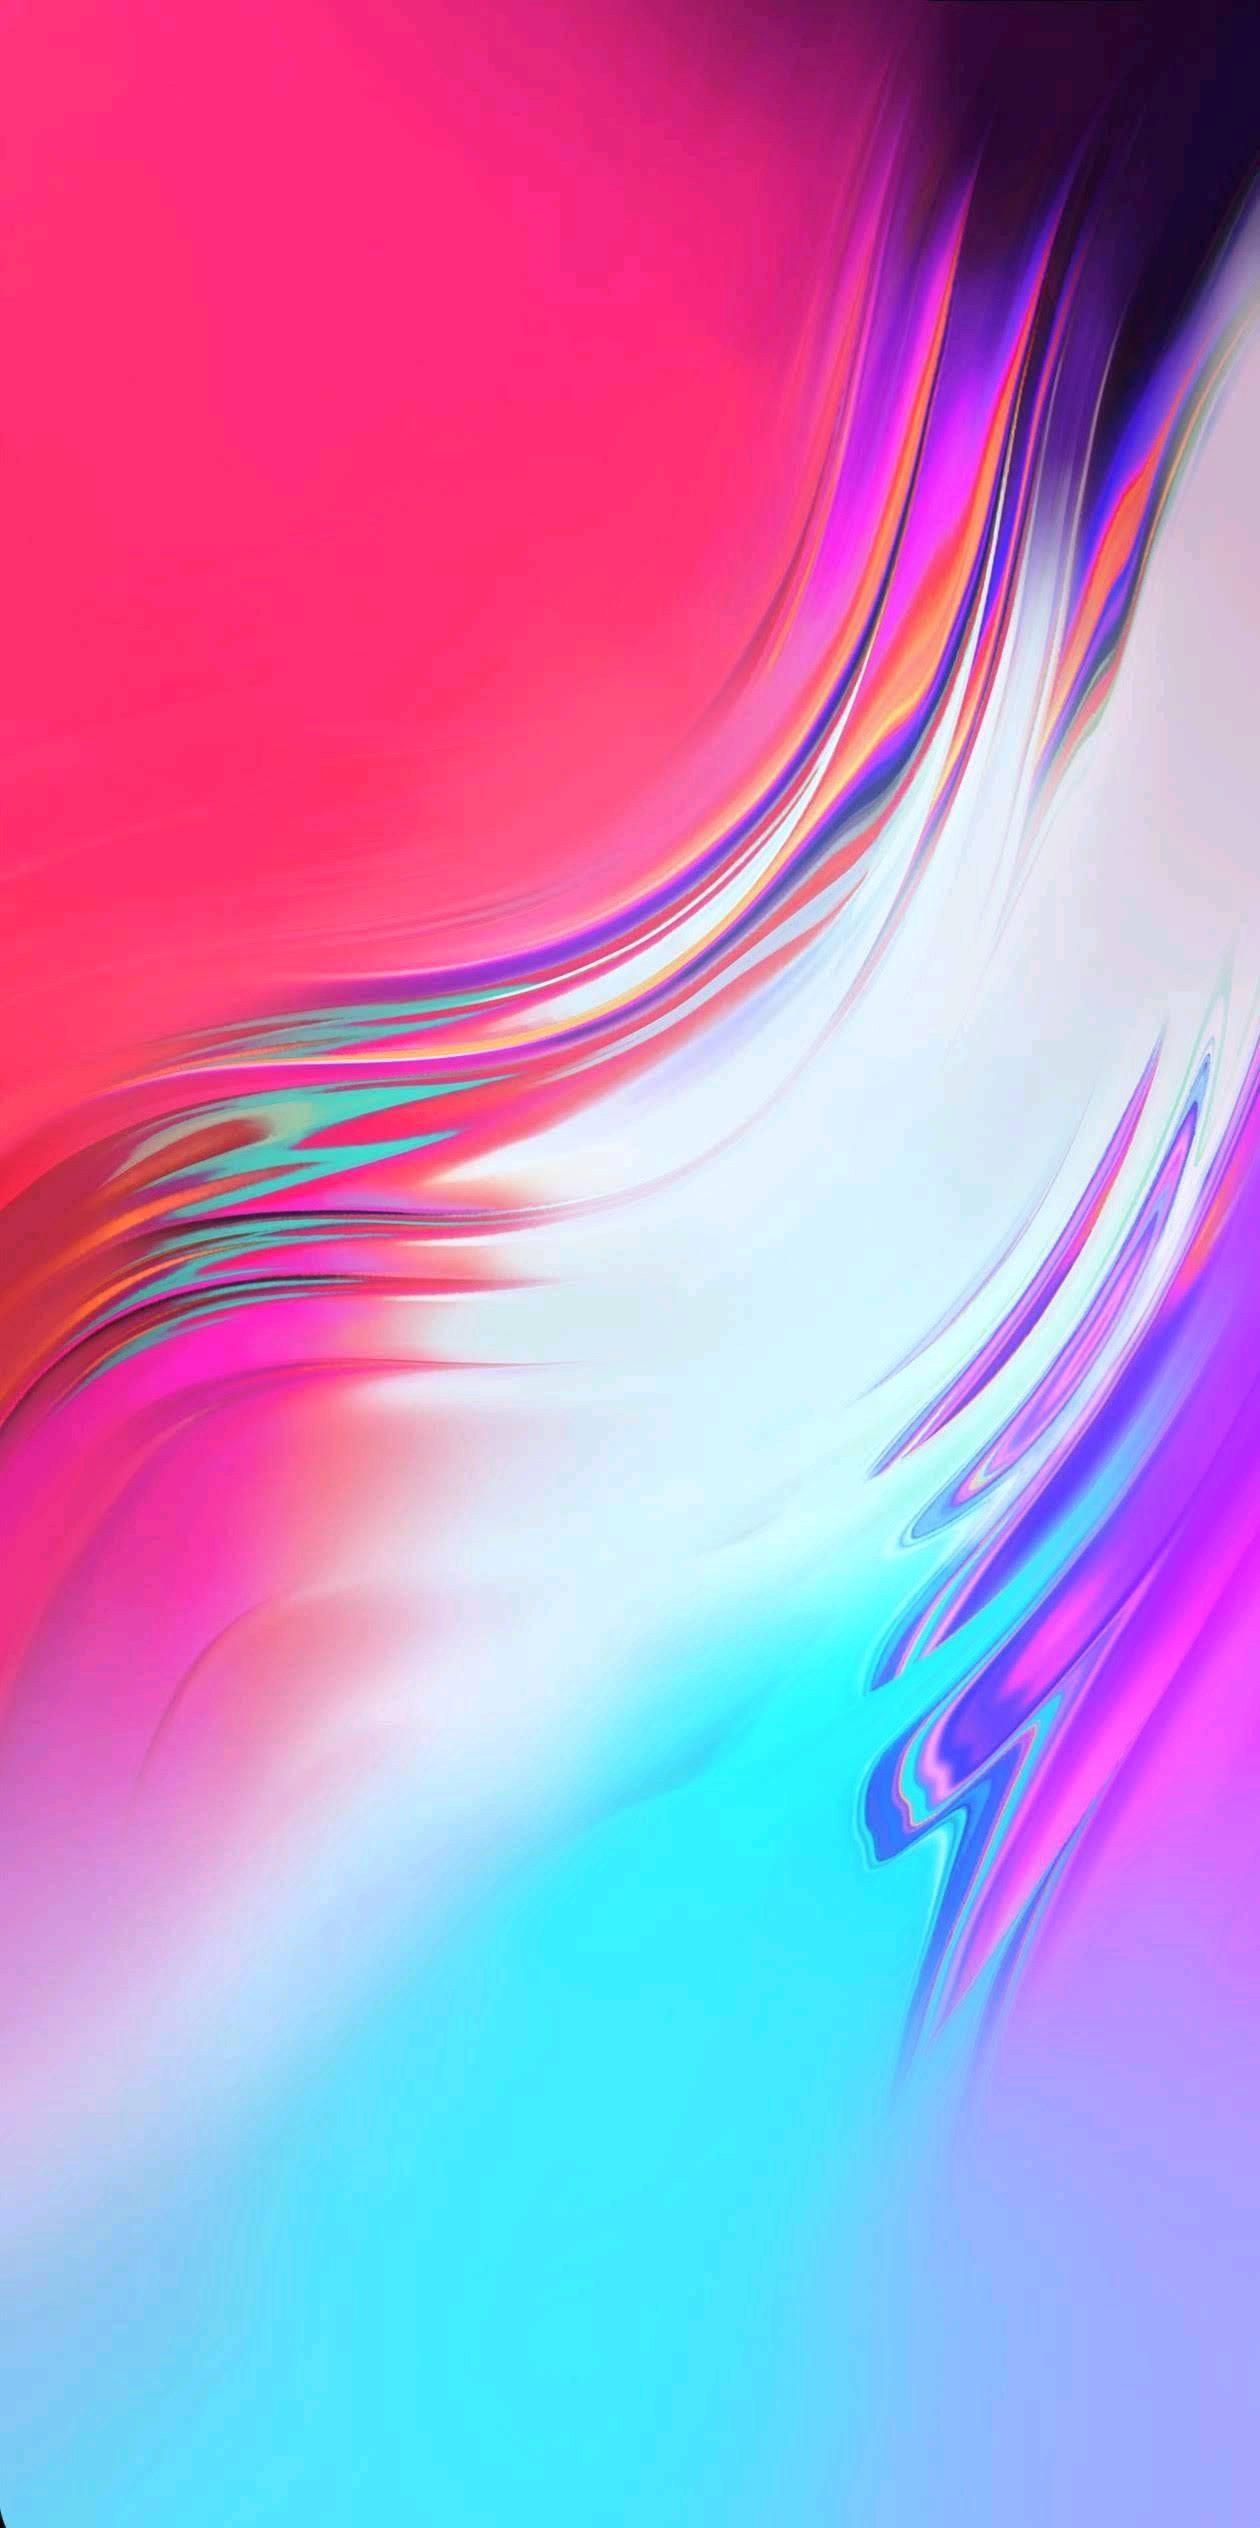 Get the Samsung Galaxy Note 10 wallpapers here - Android Authority